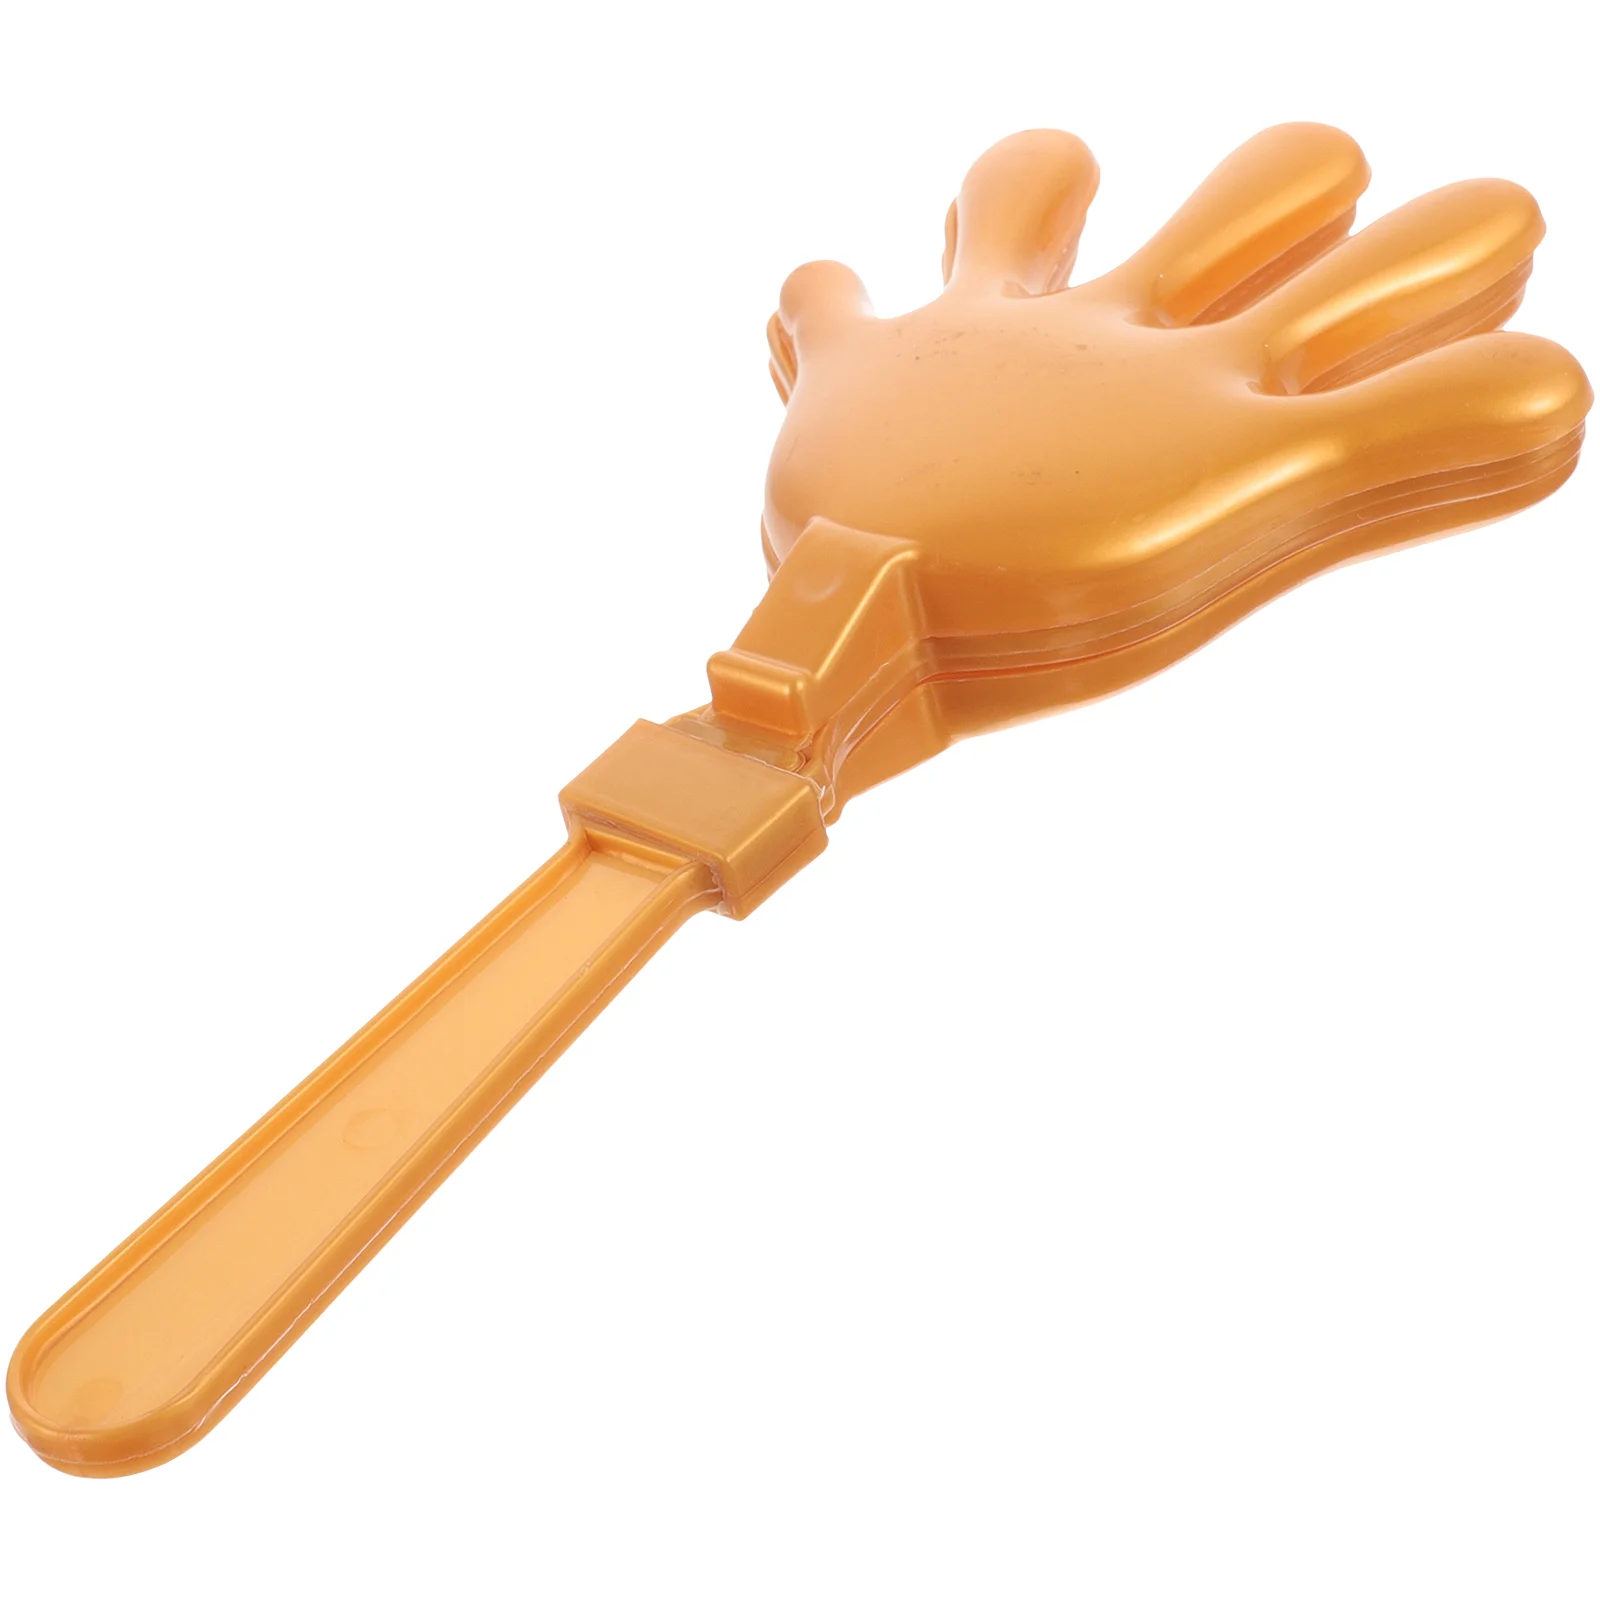 

Hand Clappers Plastic Hand Clappers Noise Makers Noisemaker Game Accessories Sports Parties Concerts Cheer Prop Birthday